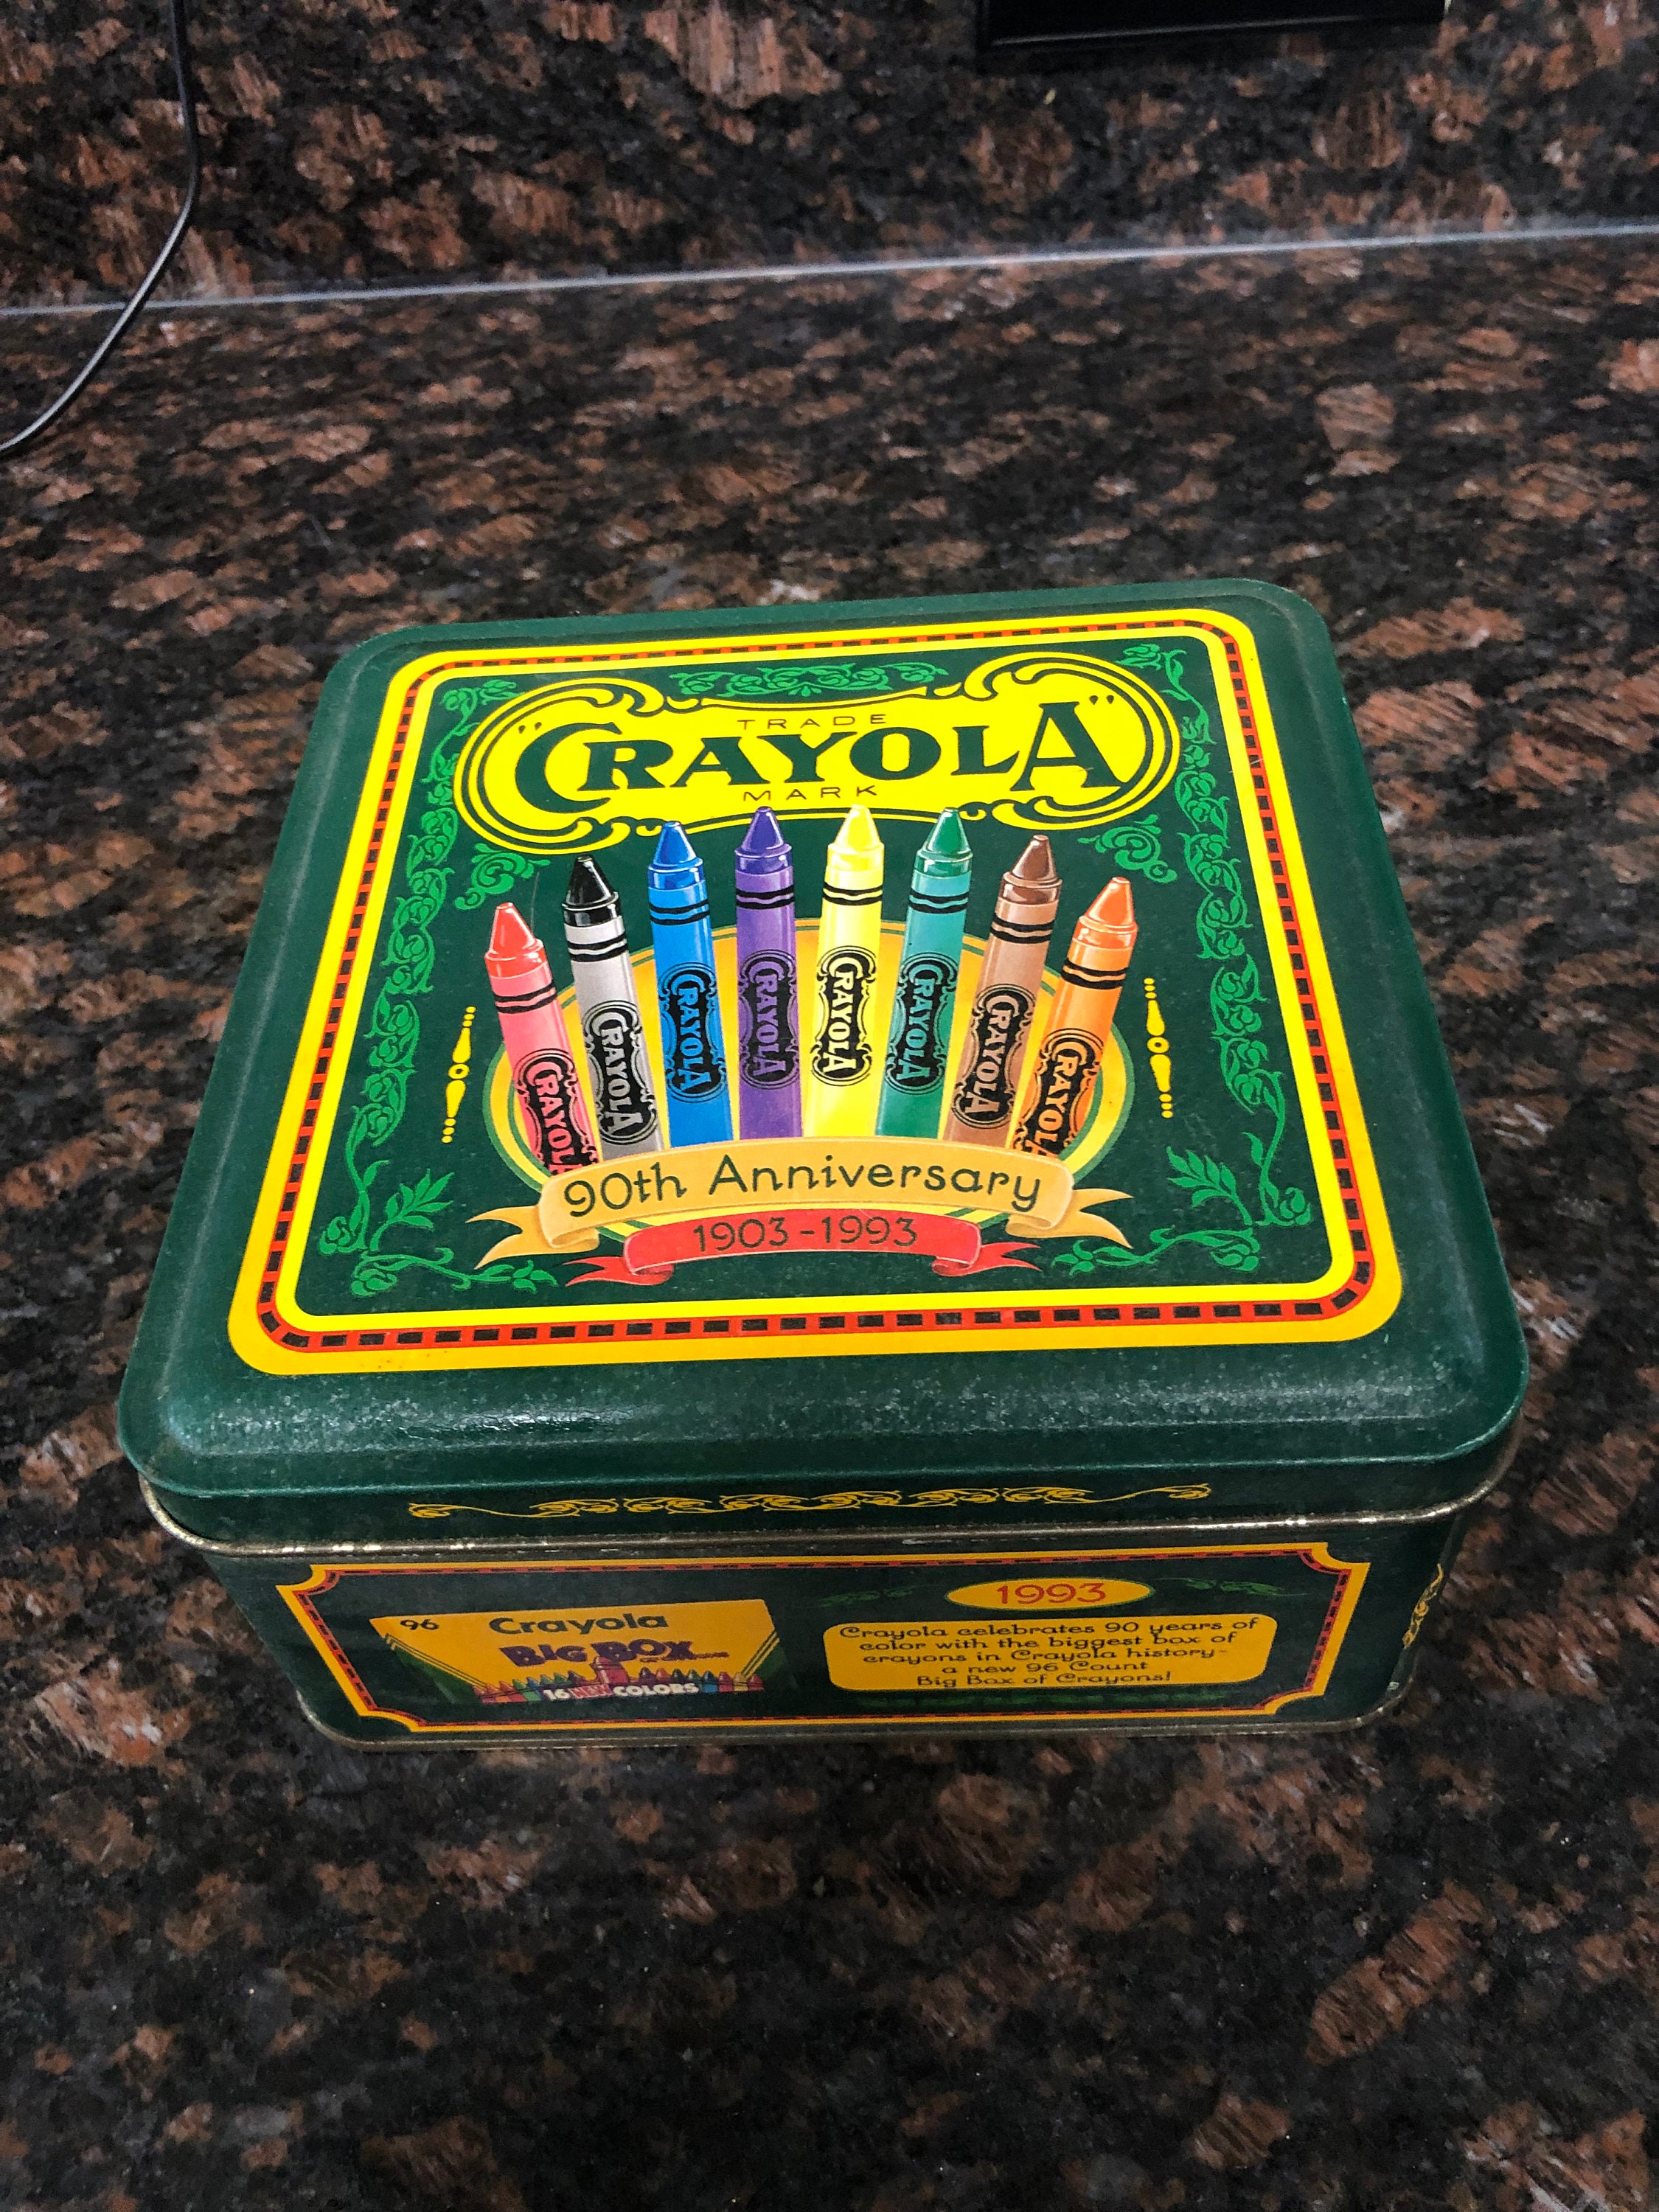 Your Choice of 1 Vintage Crayola Crayon Tin With 64 Pack of